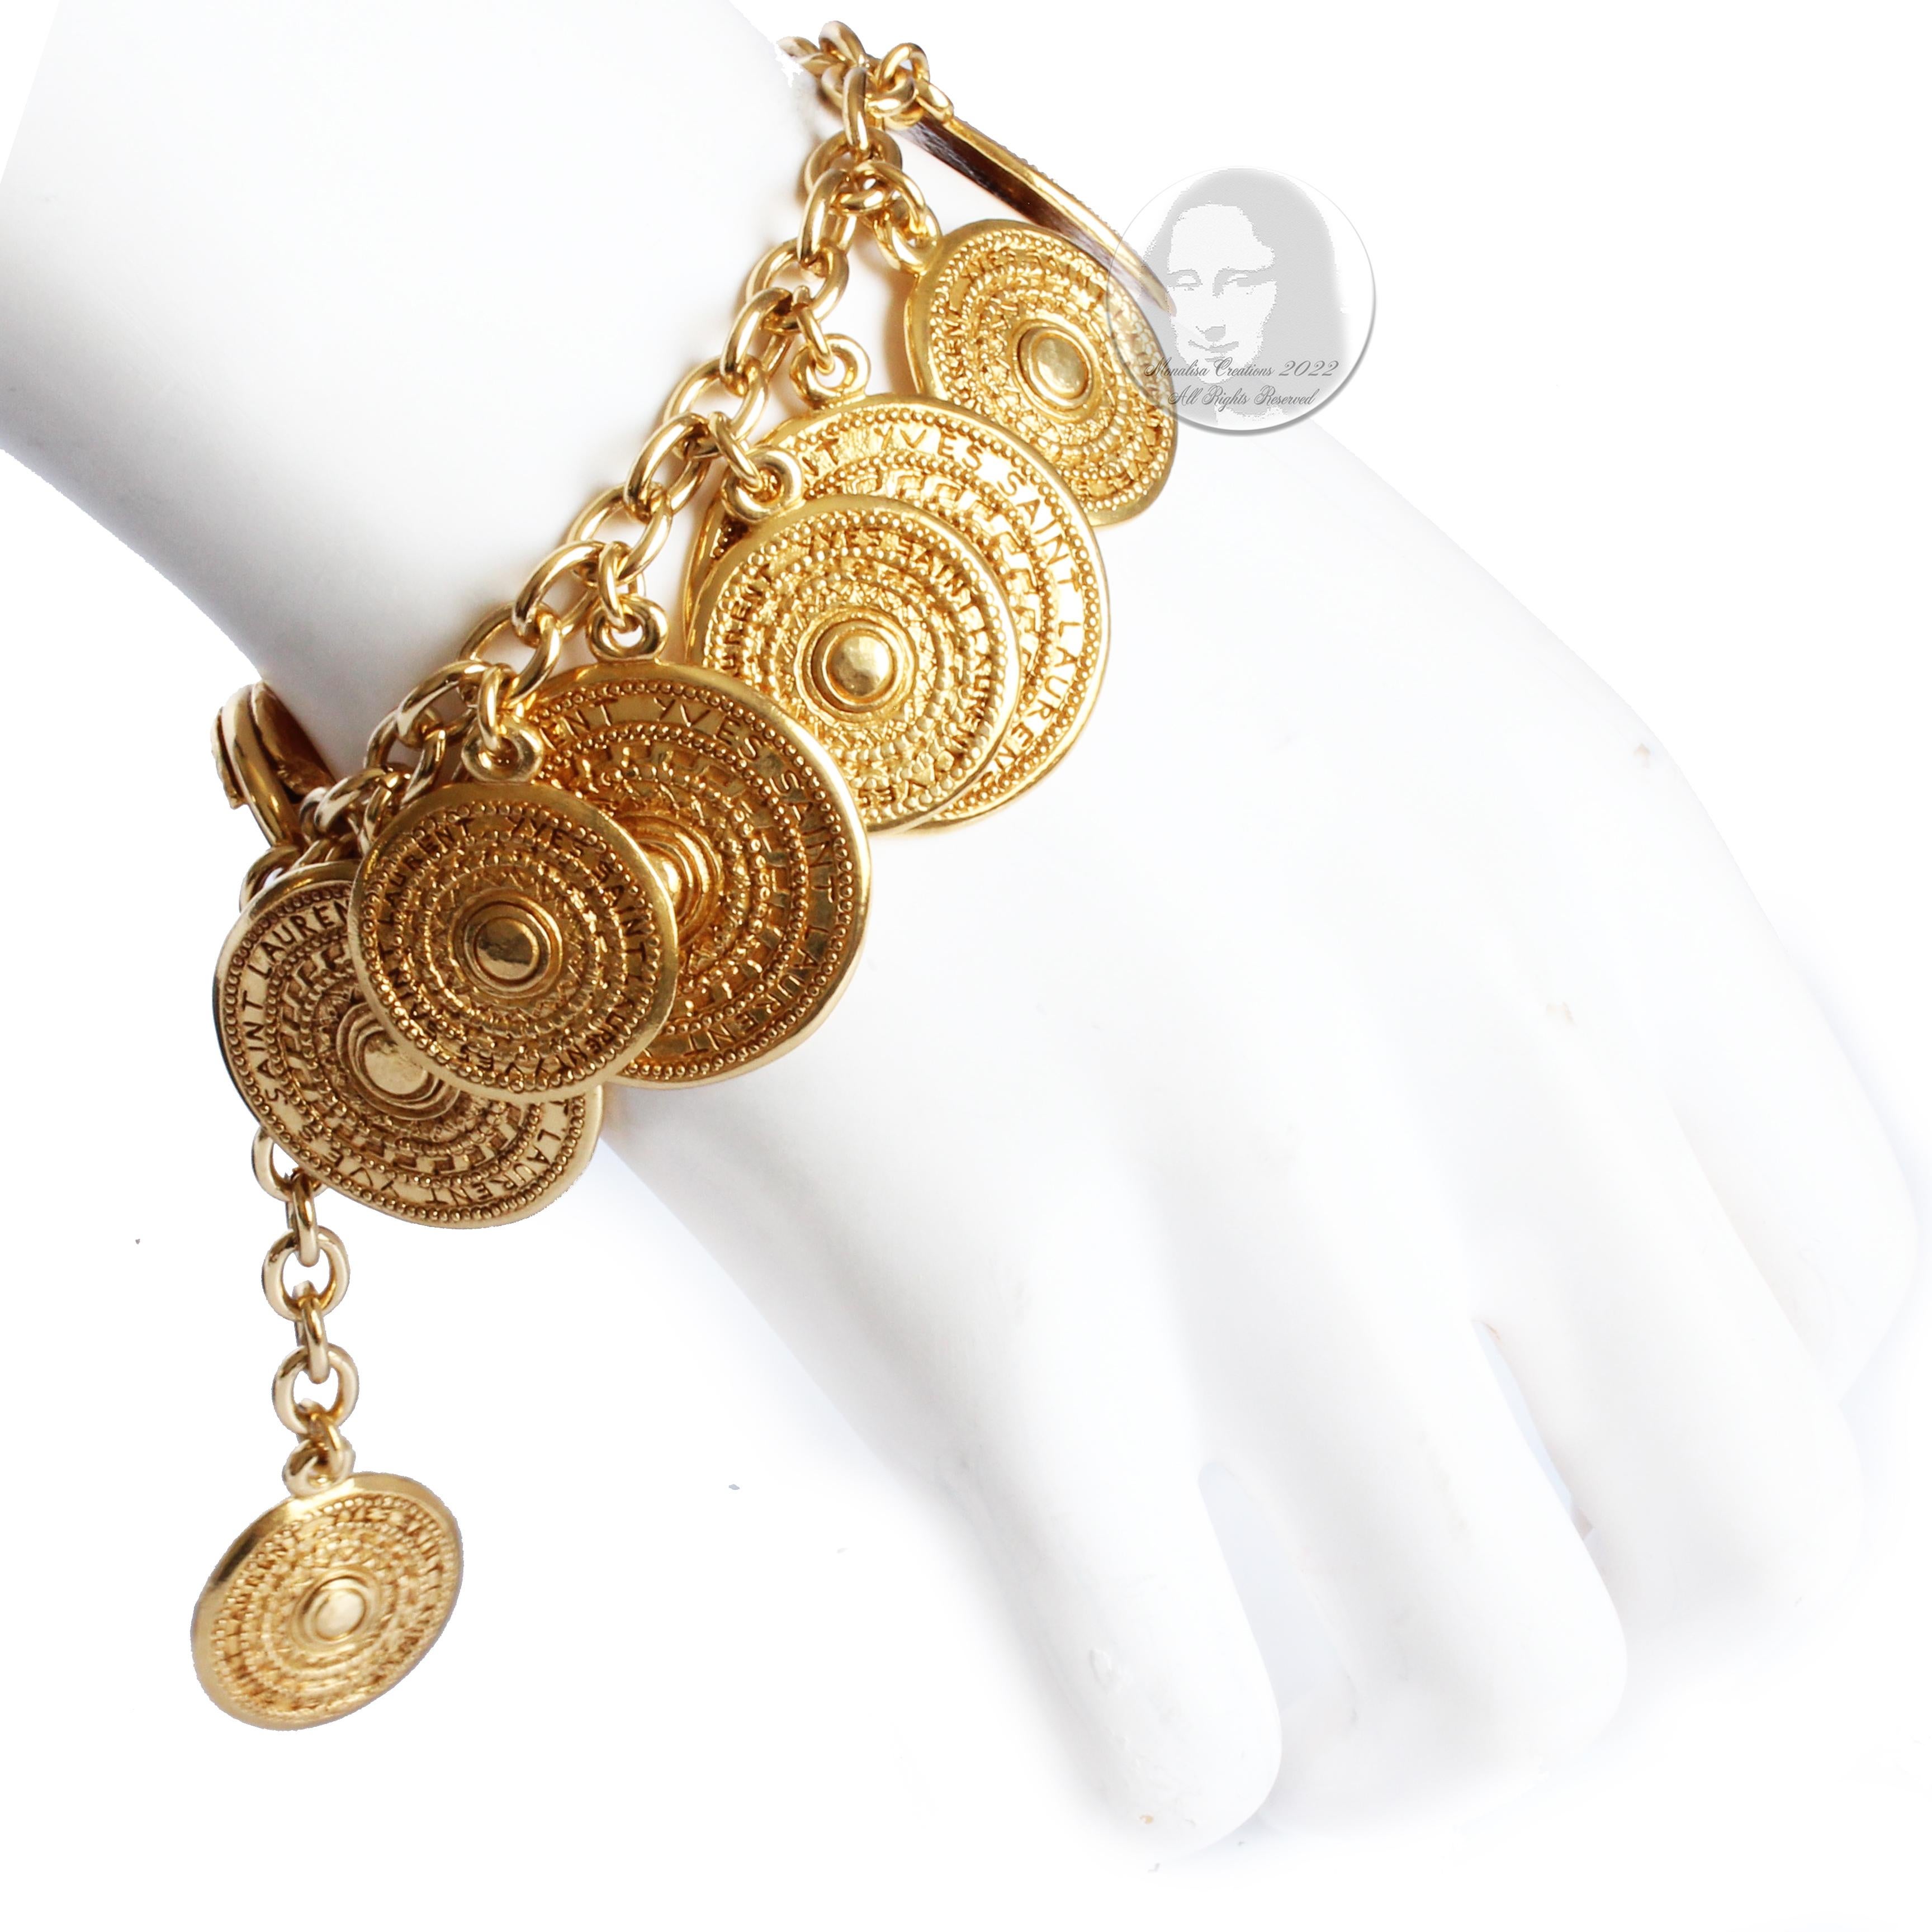 Contemporary Yves Saint Laurent Bracelet Gypsy Coins YSL Charms Gold Medallion Metal Vintage 